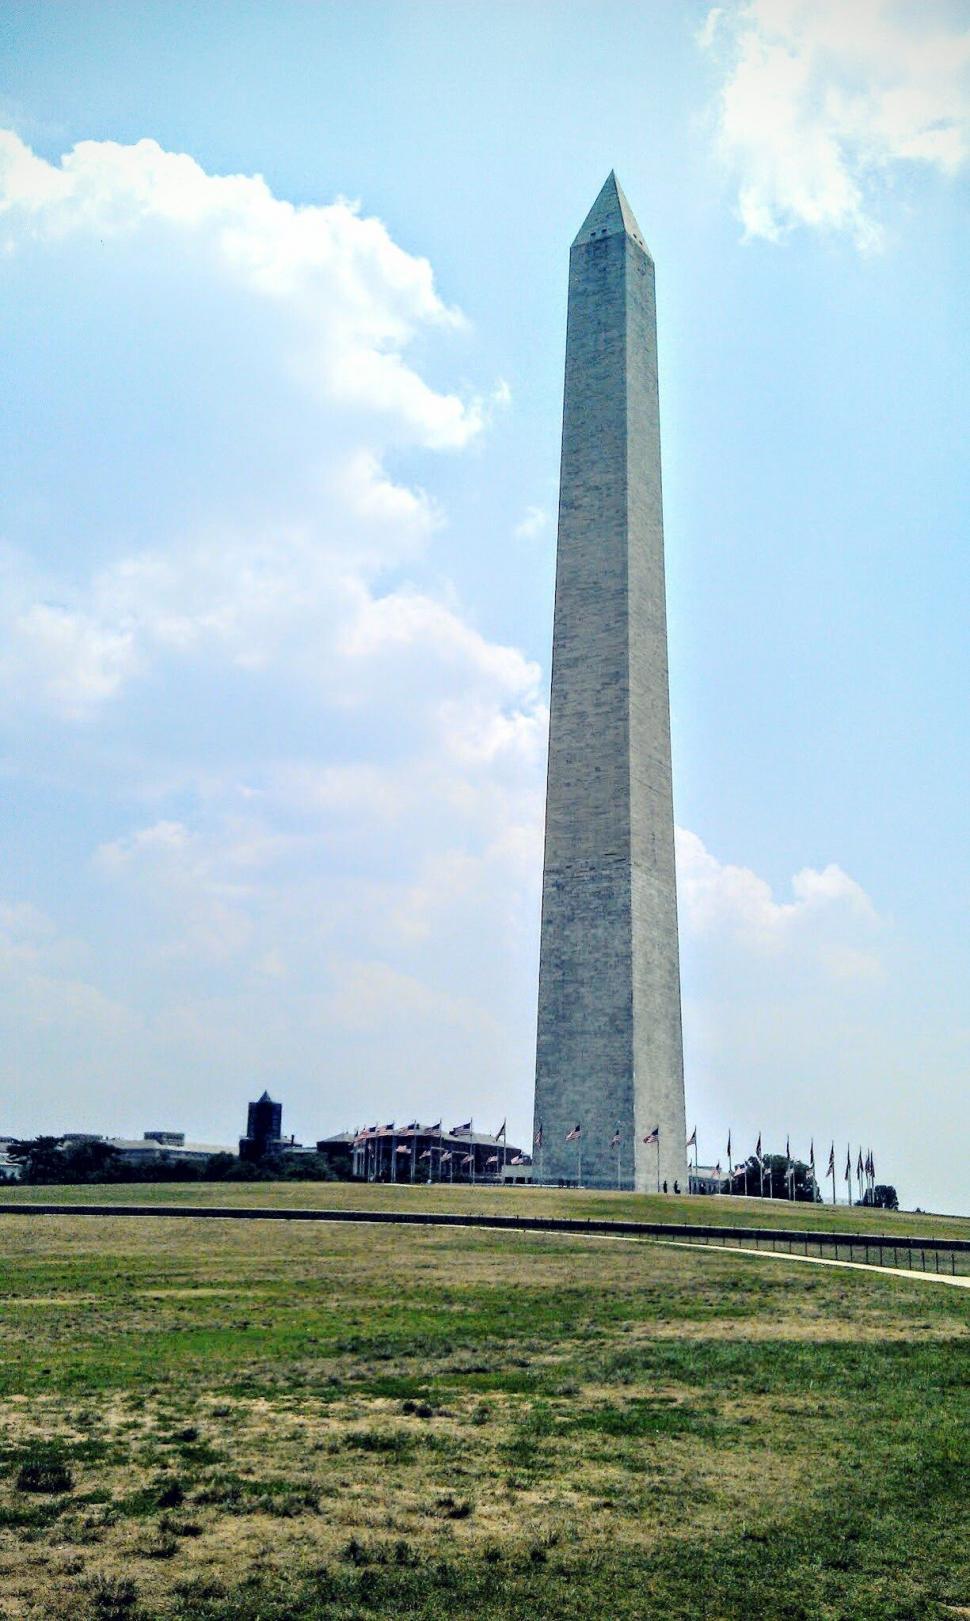 Free Image of Washington Monument and lawn 